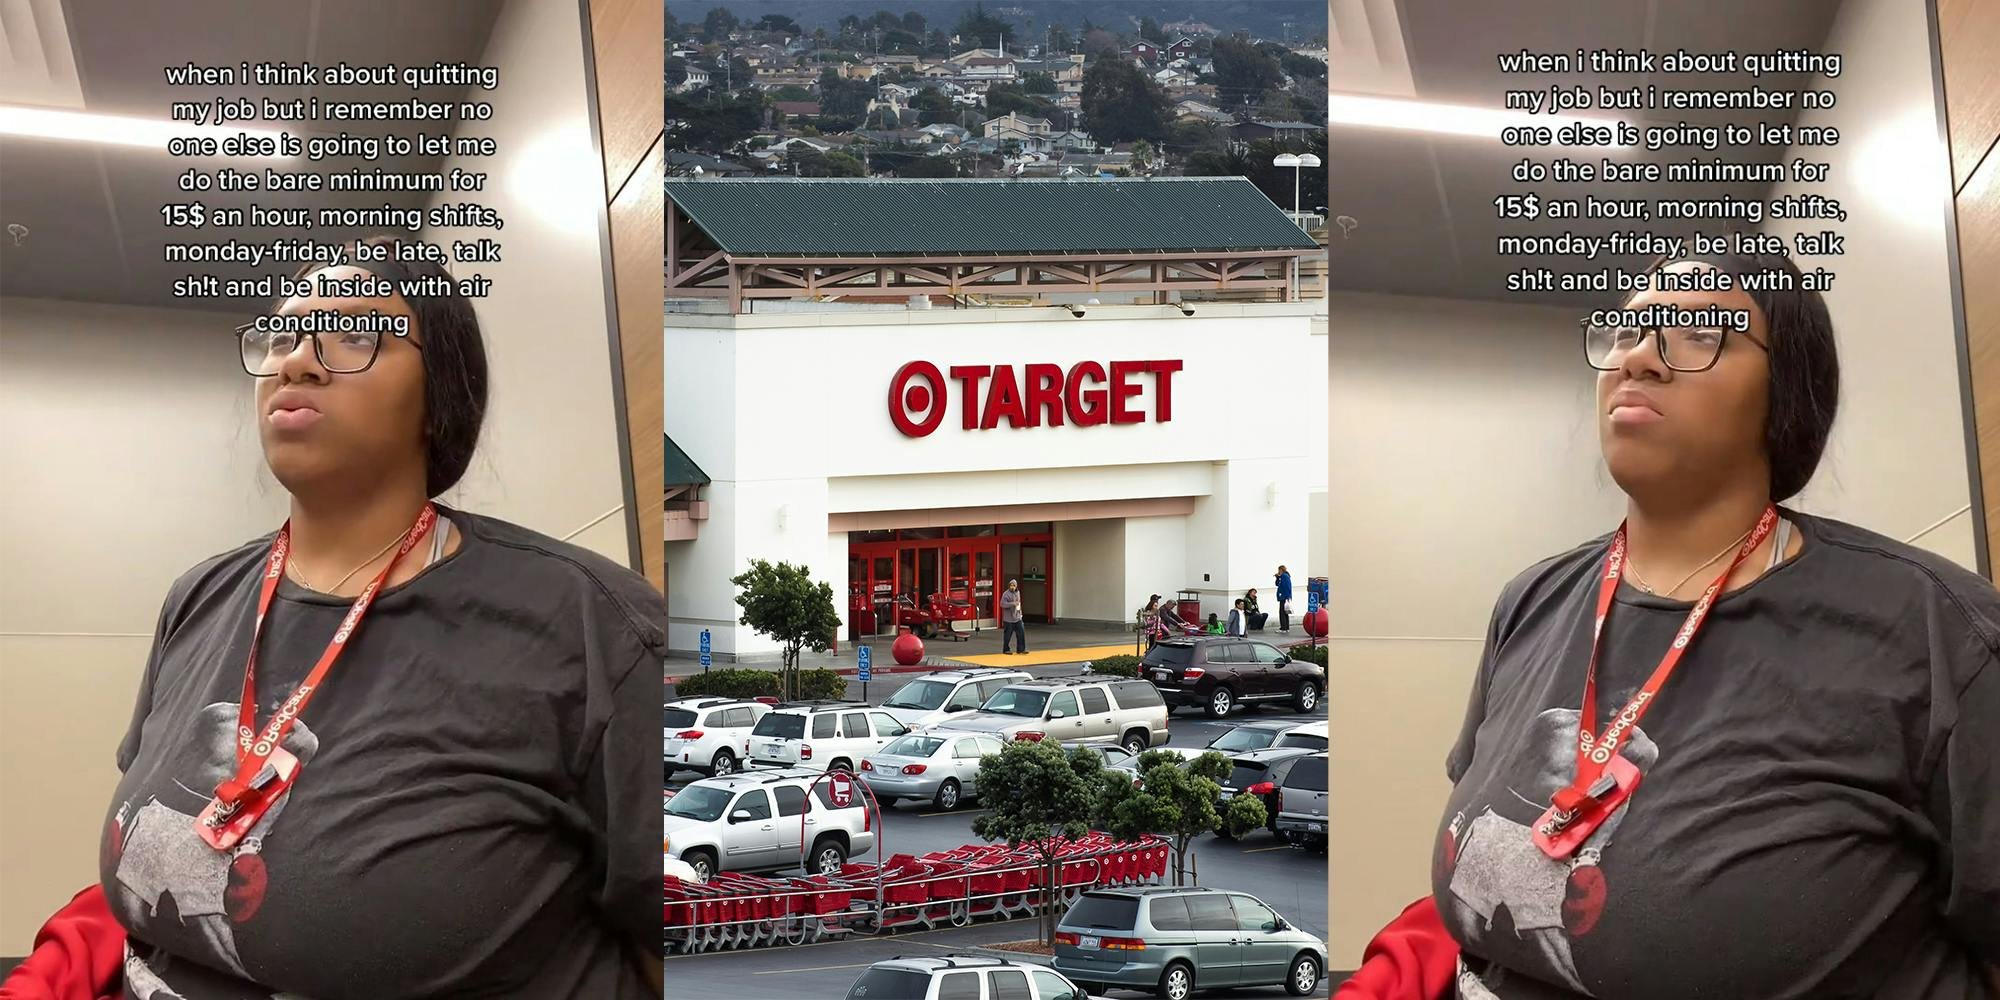 Target fulfillment worker won’t quit because ‘no one else is going to let me do the bare minimum’